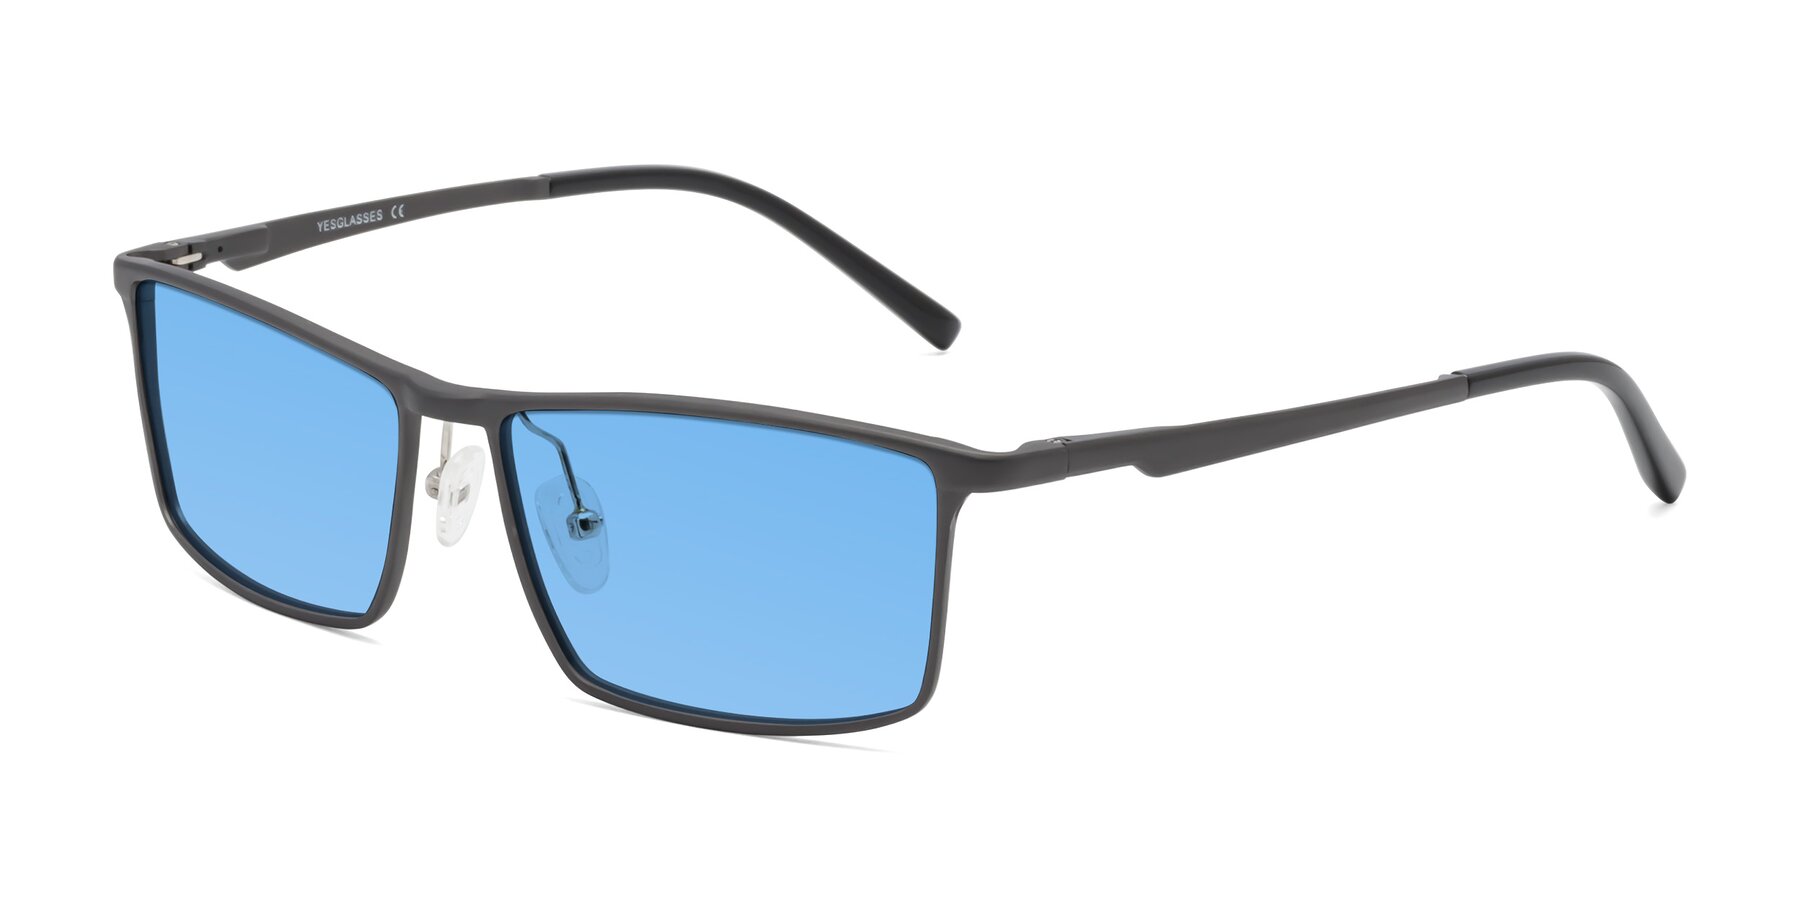 Angle of CX6330 in Gunmetal with Medium Blue Tinted Lenses